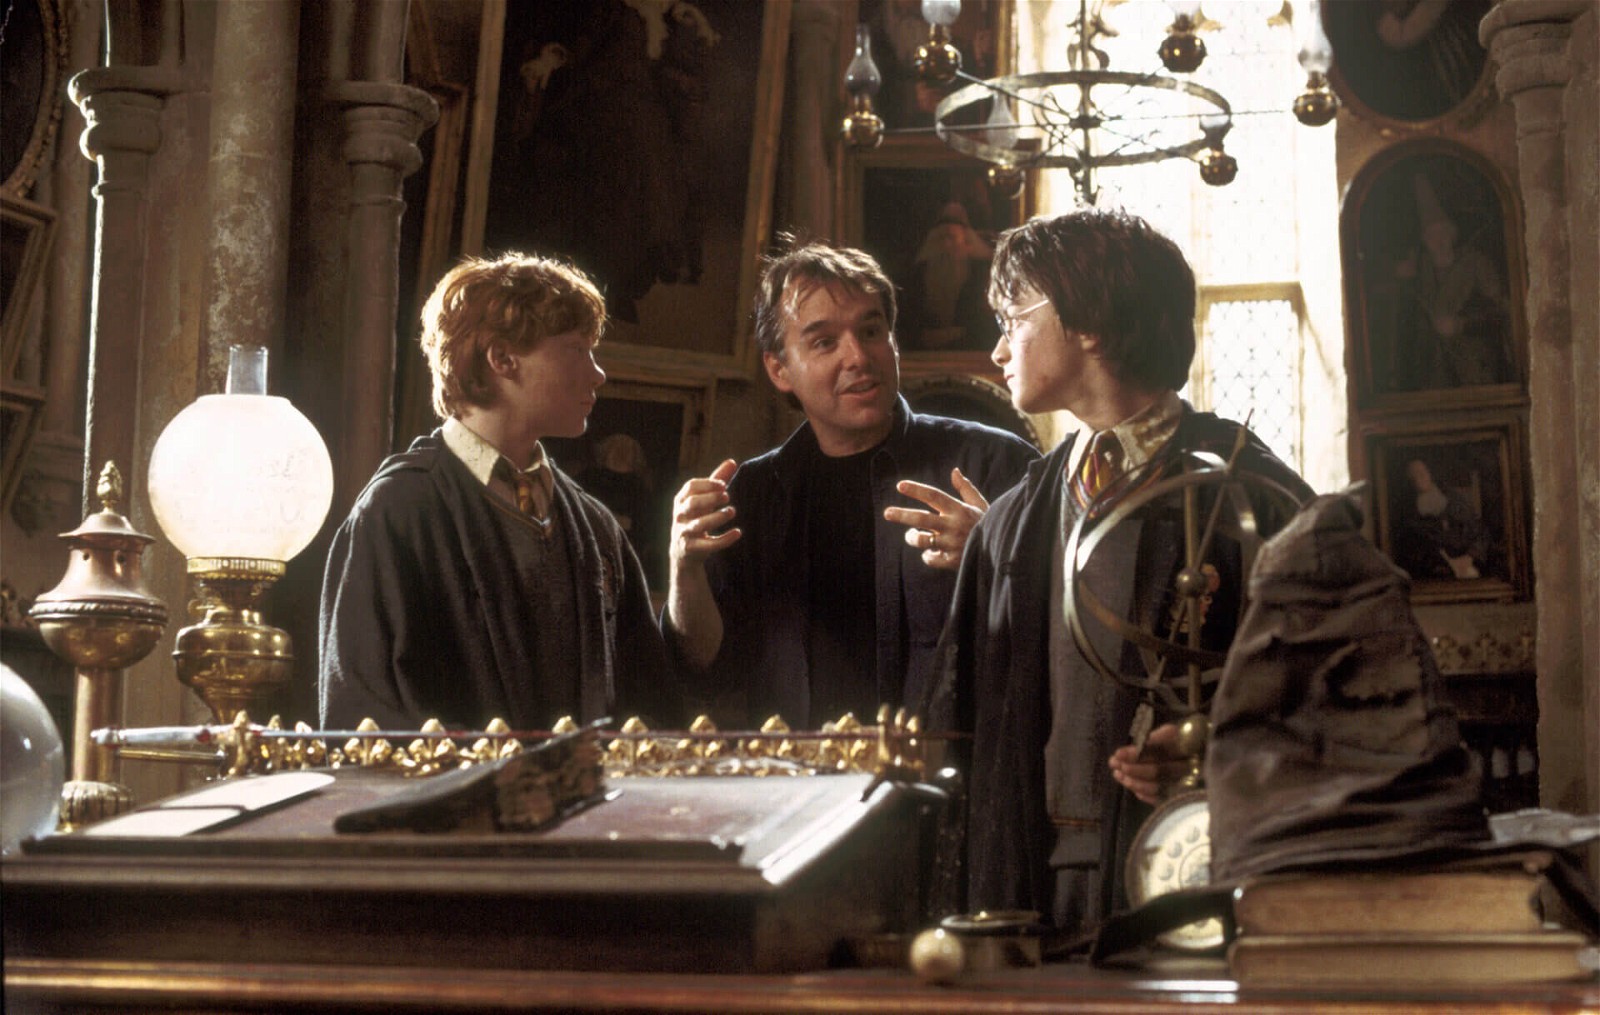 Chris Columbus with Daniel Radcliffe and Rupert Grint